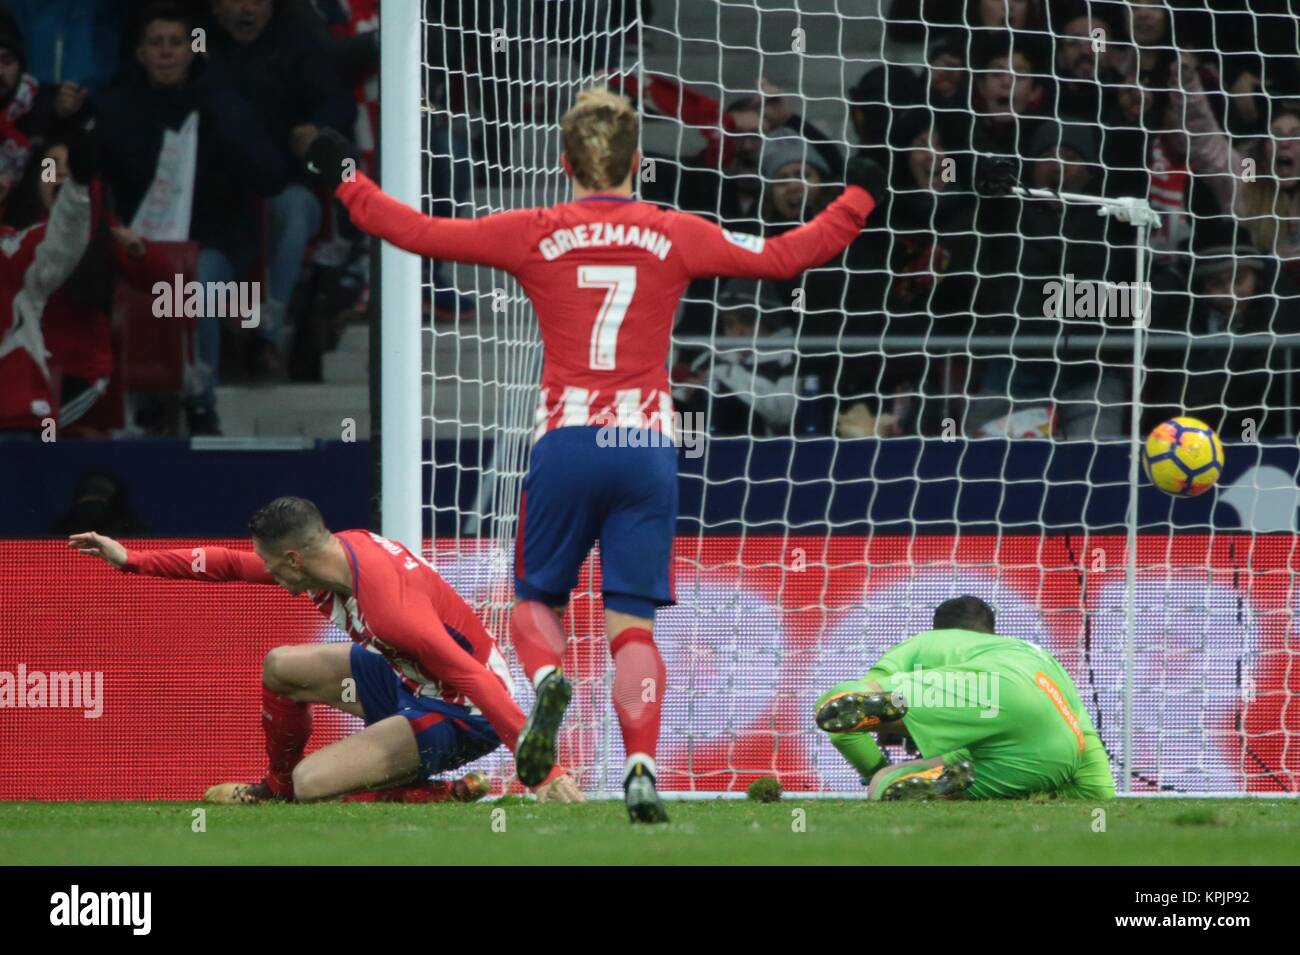 Madrid. 17th Dec, 2017. Atletico Madrid's Fernando Torres (L) shoots to score during the Spanish league match between Atletico Madrid and Alaves in Madrid, Spain. Atletico Madrid won 1-0. Credit: Juan Carlos Rojas/Xinhua/Alamy Live News Stock Photo